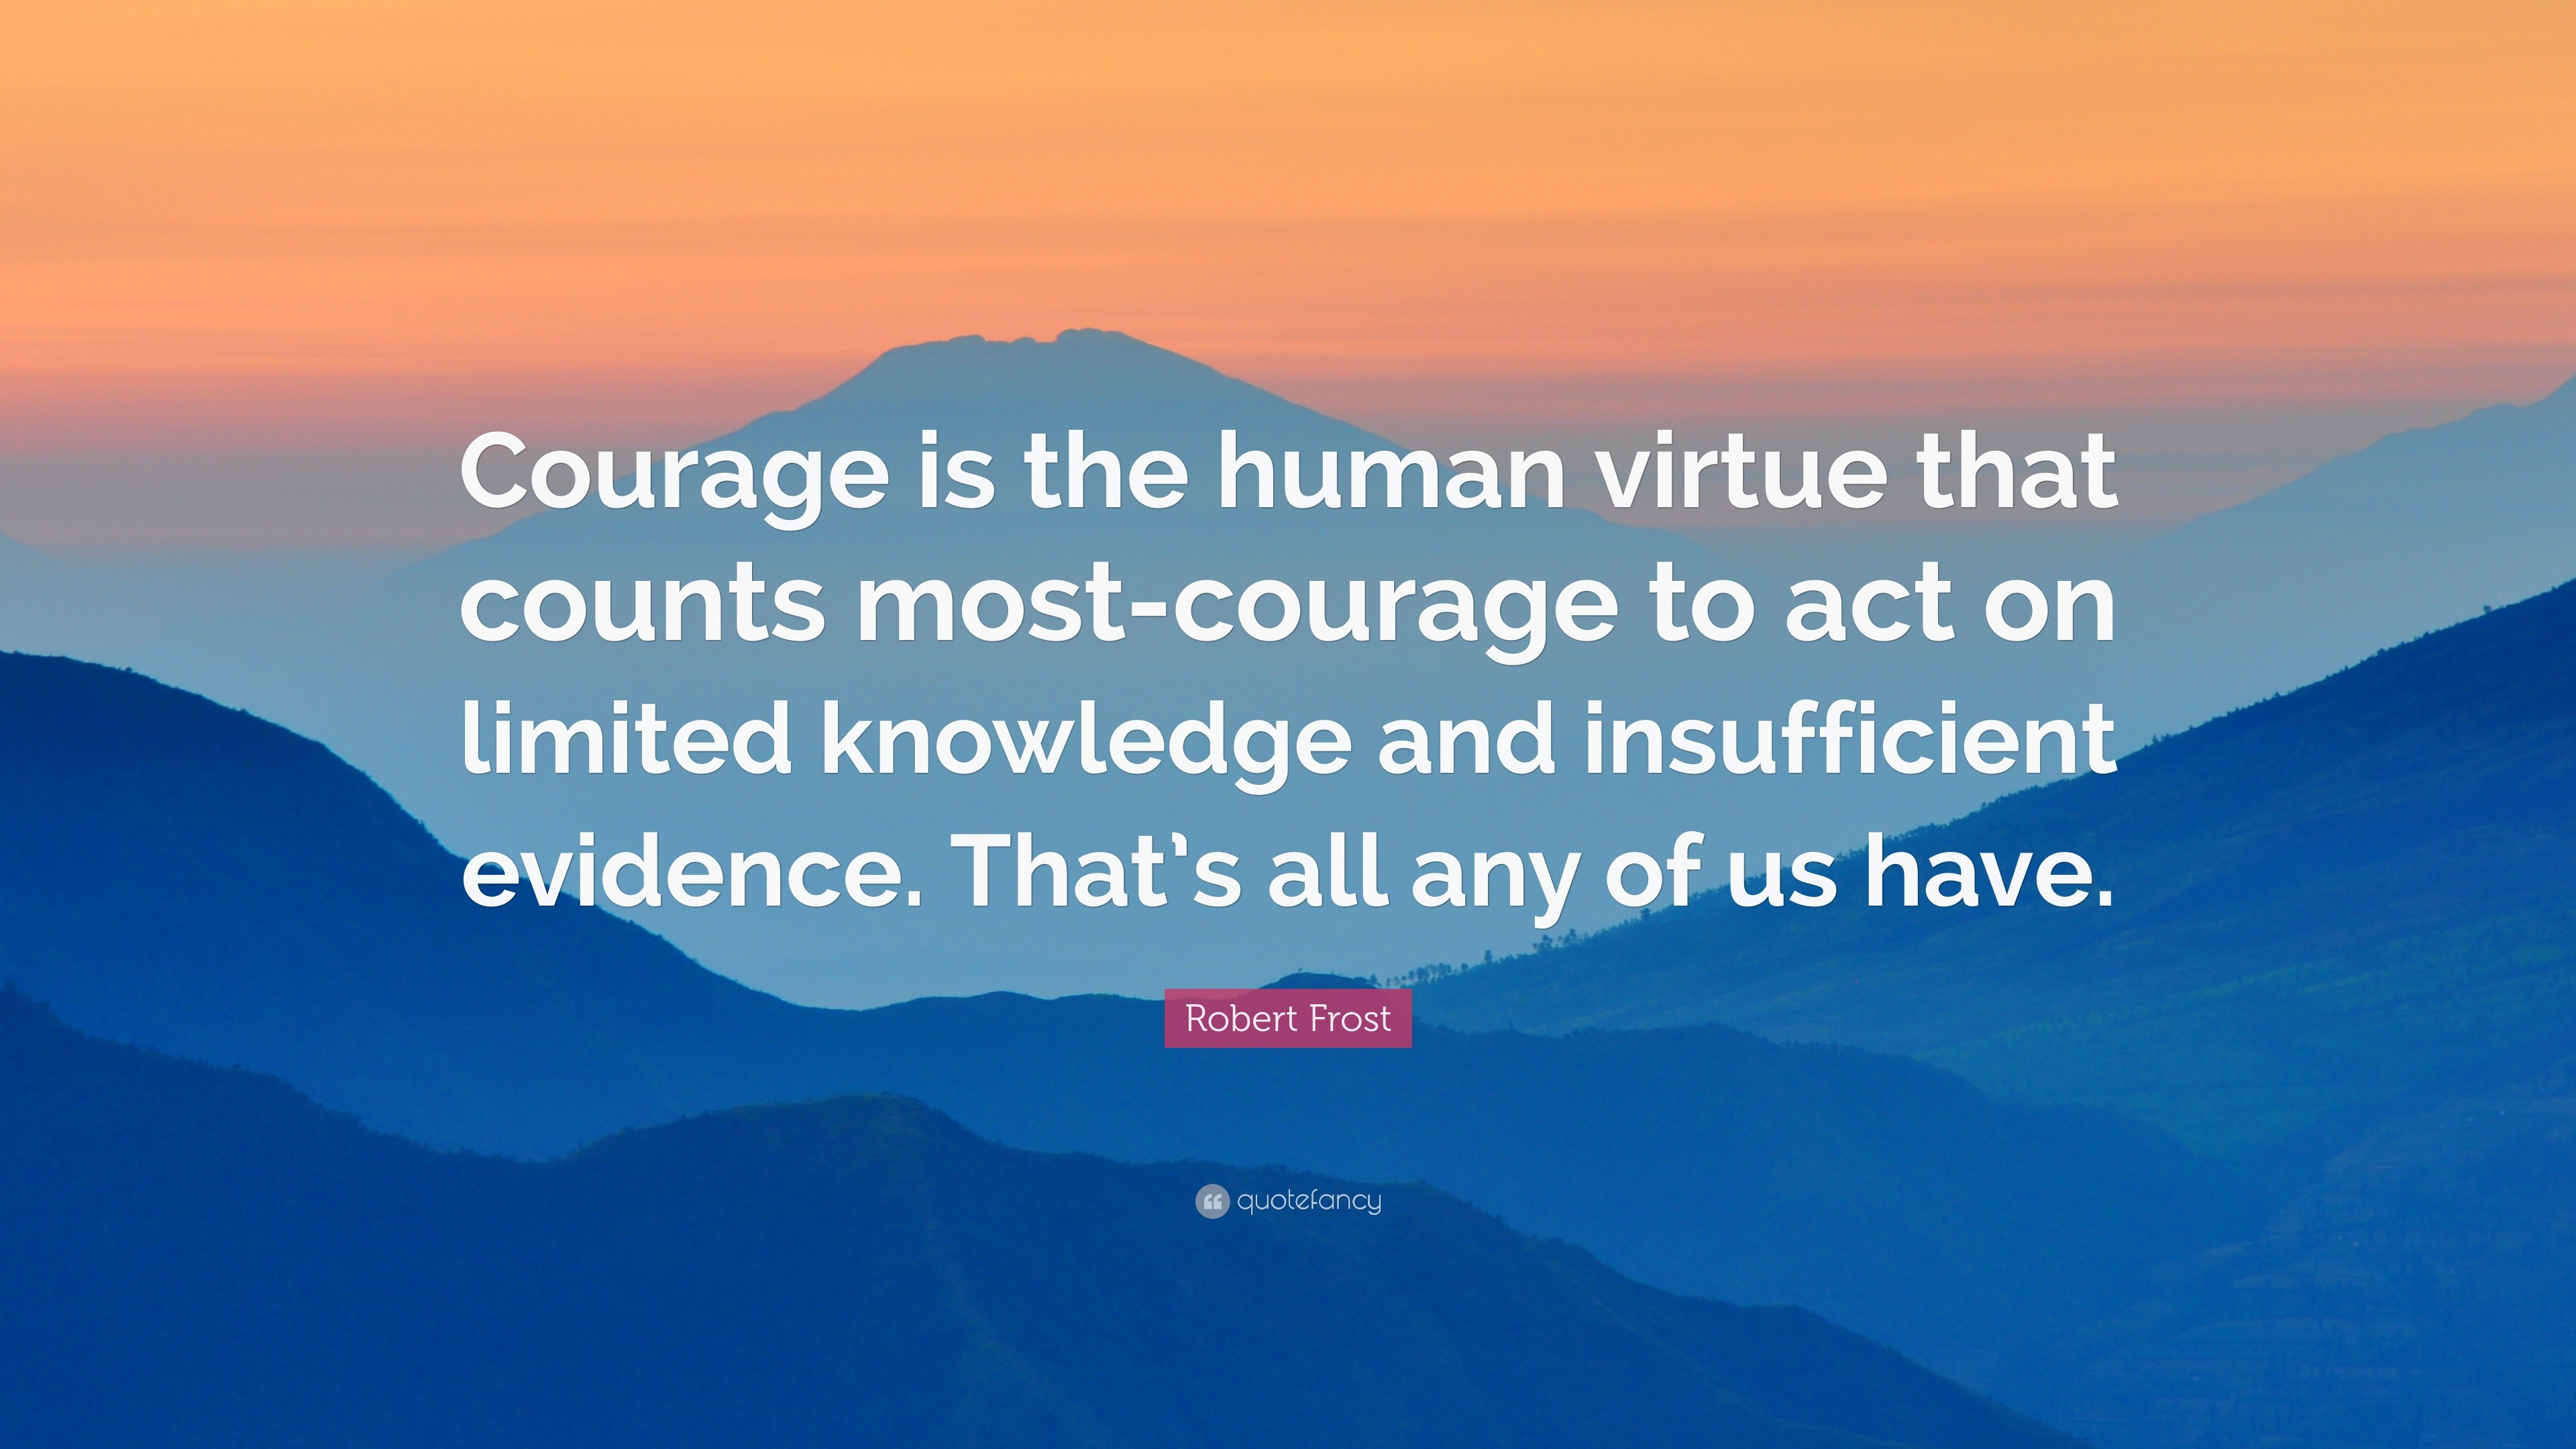 Act of courage: Courageous Souls: Embracing Acts of Courage - FasterCapital